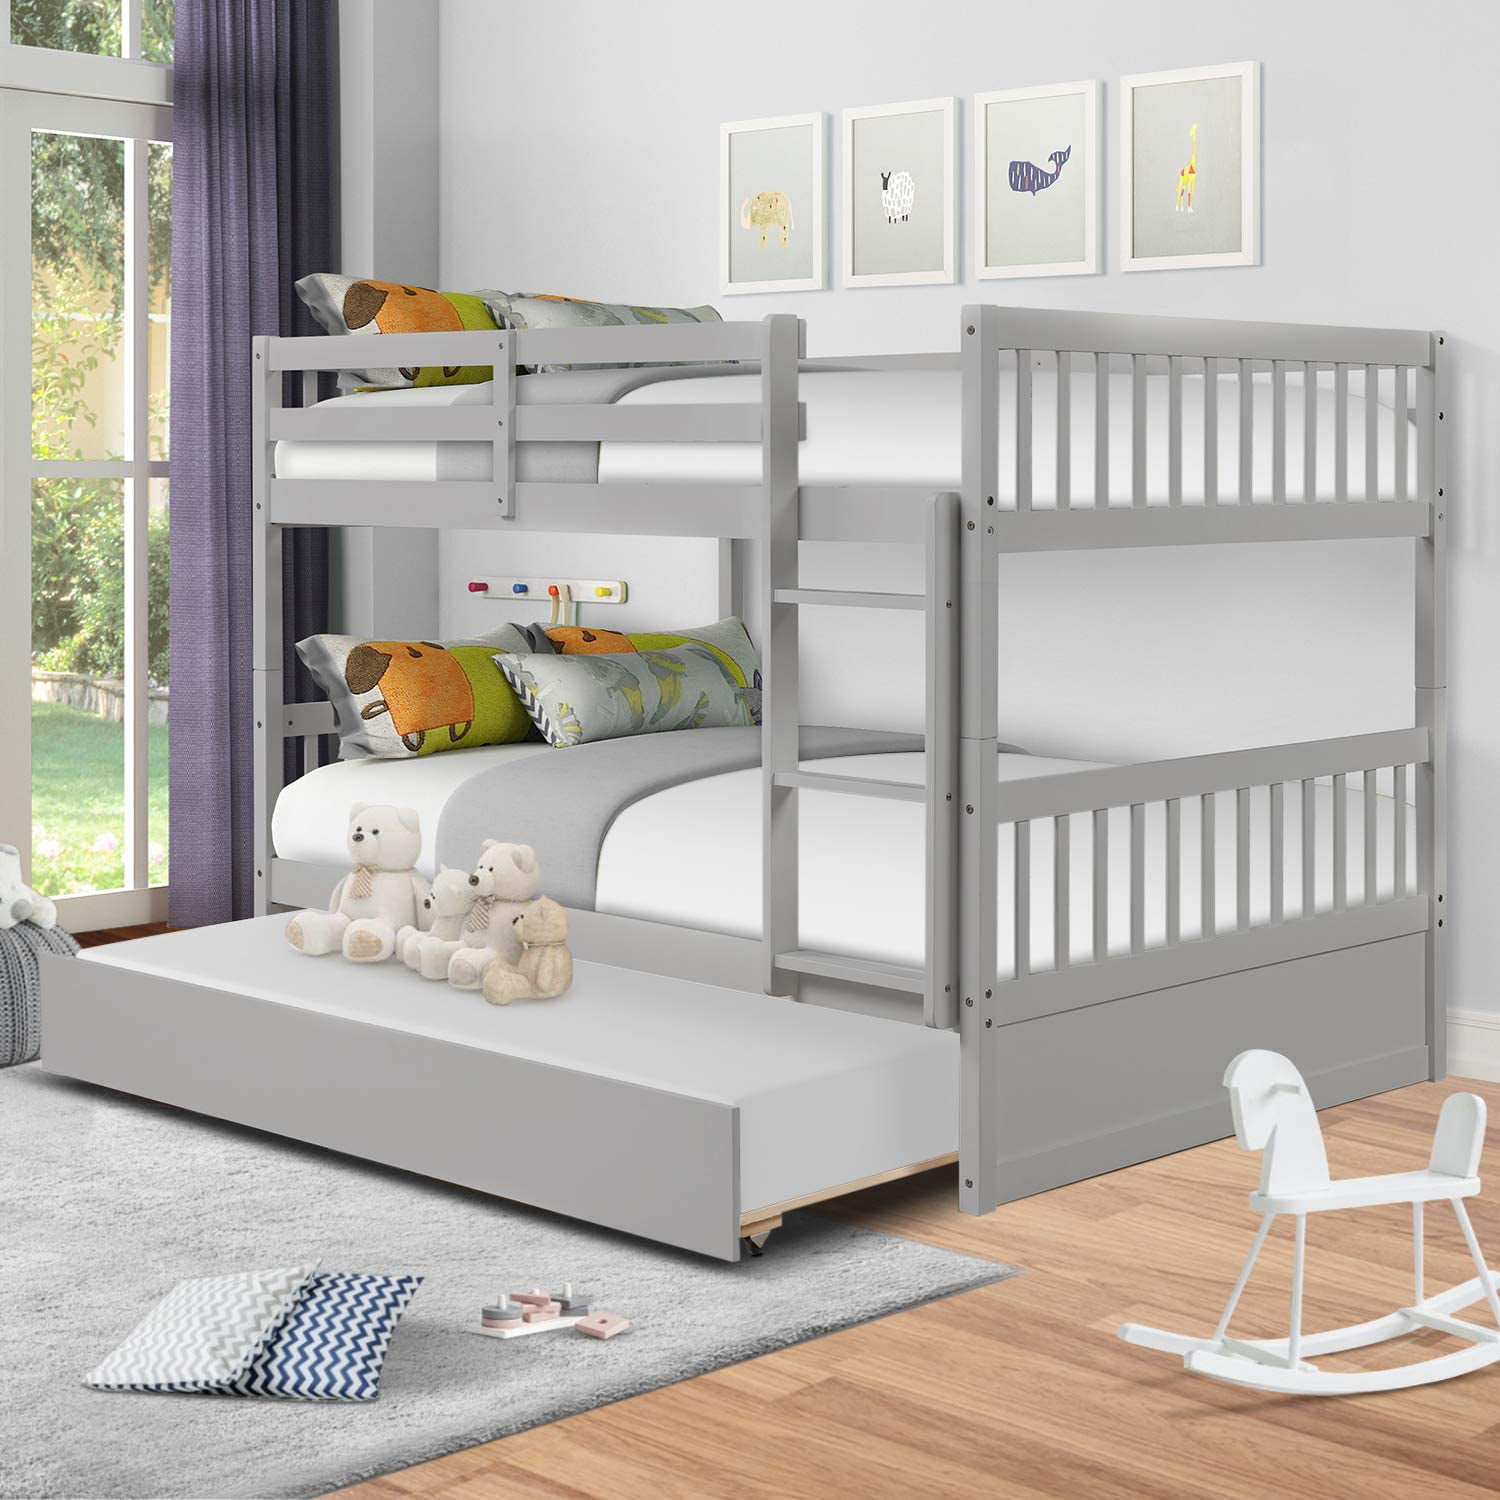 Bunk Bed With Trundle Convertible, Home Source Industries Henry Full Over Full Bunk Bed